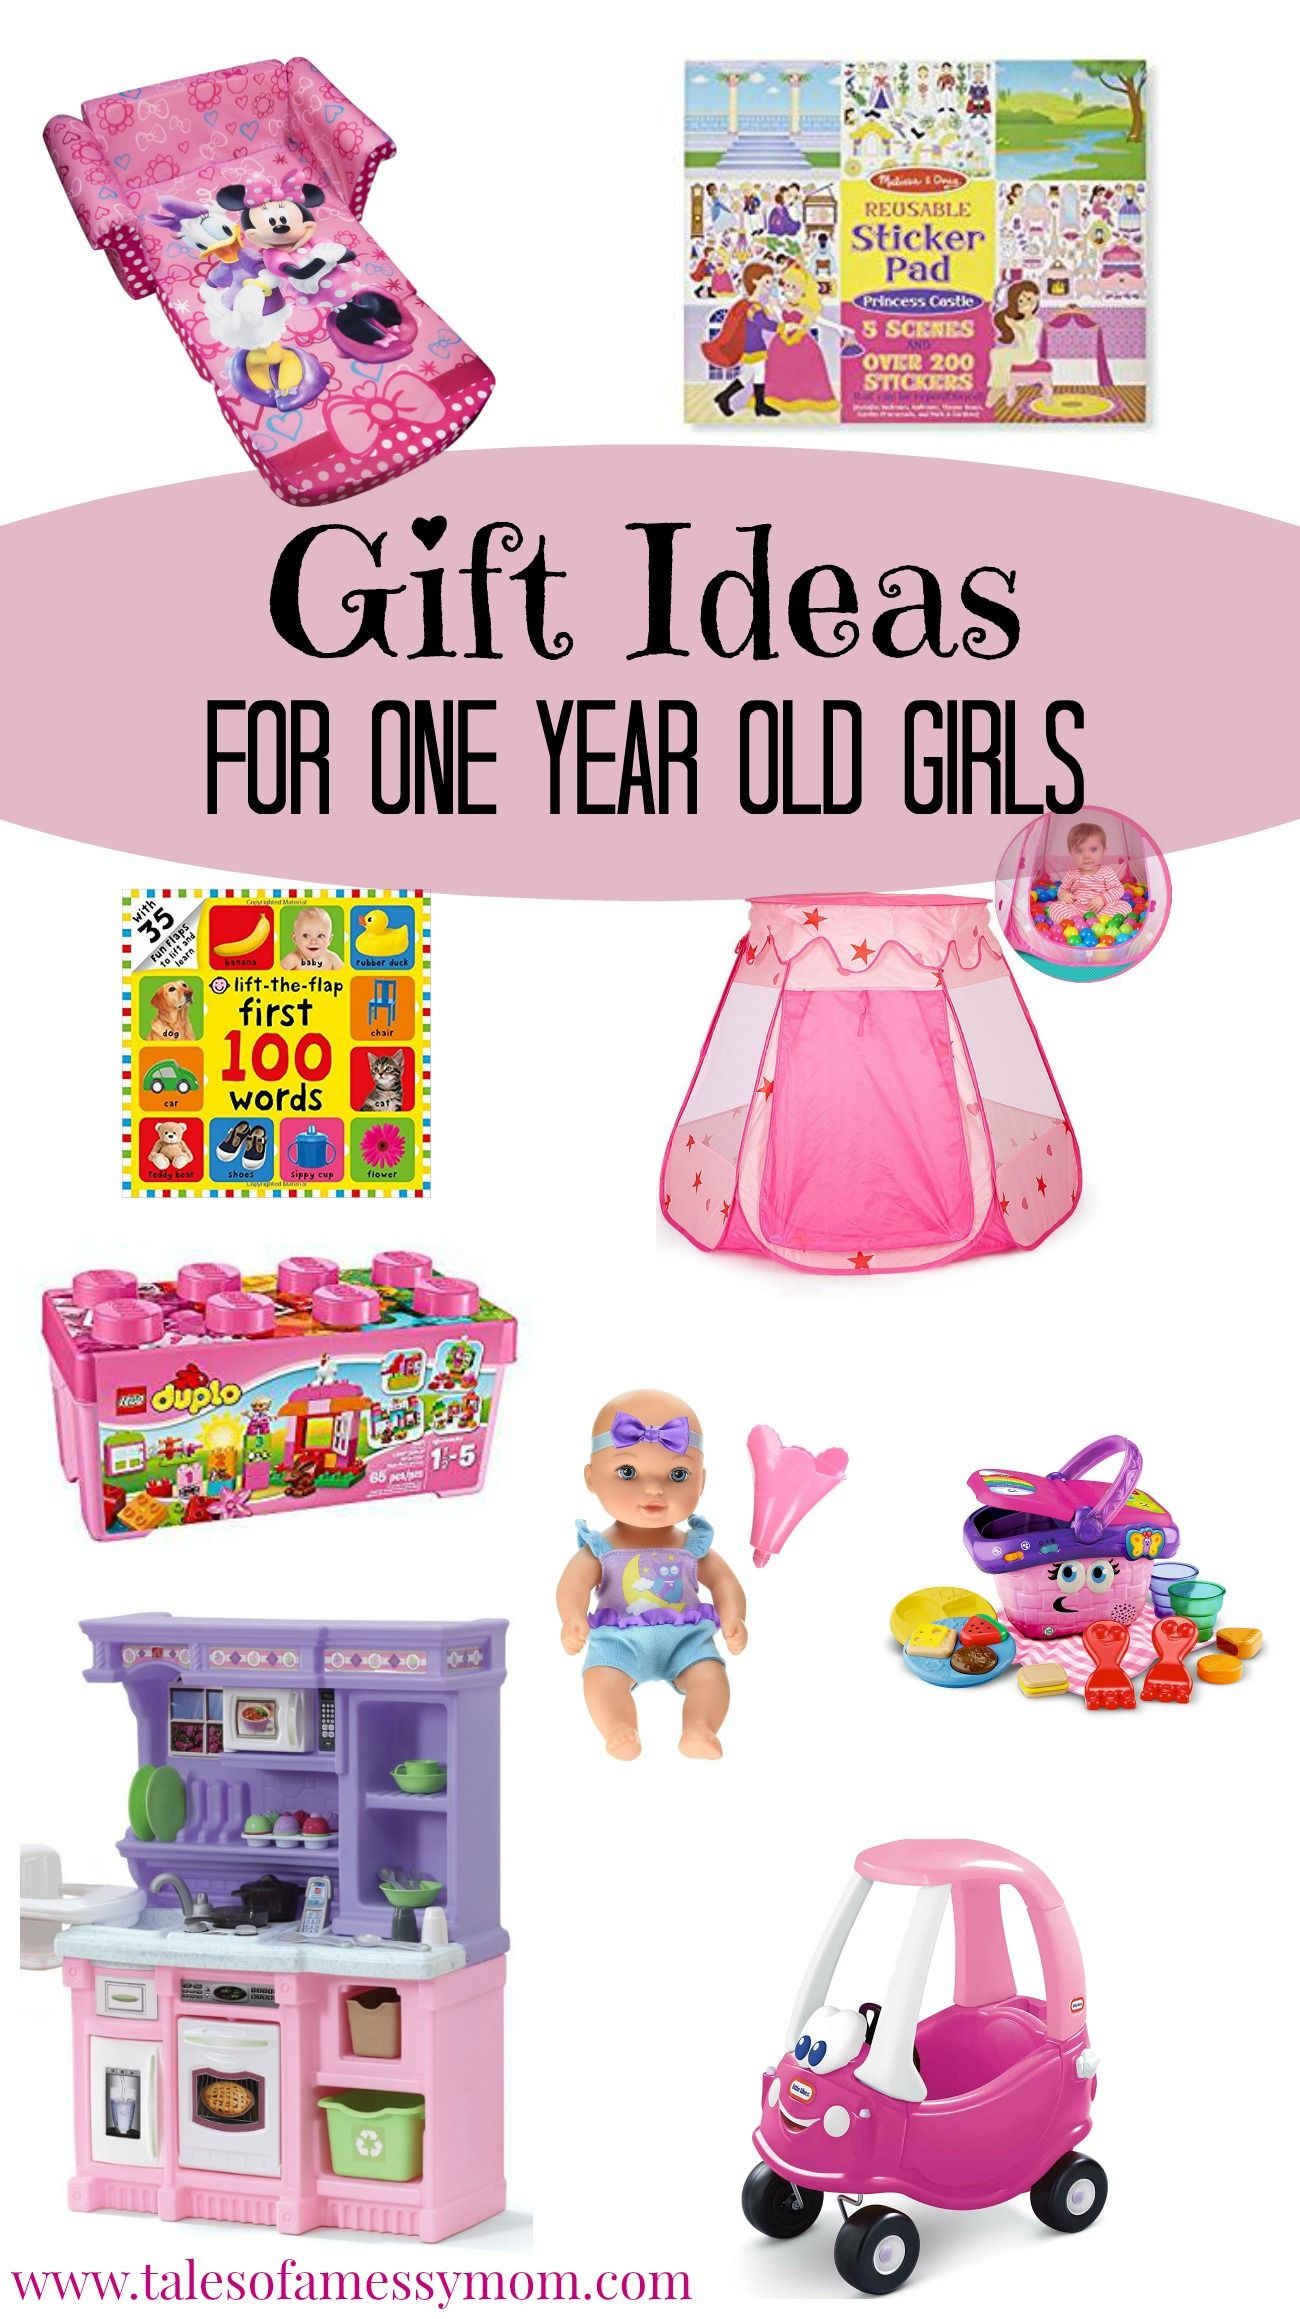 1 Year Girl Birthday Gift Ideas
 Gift Ideas for e Year Old Girls